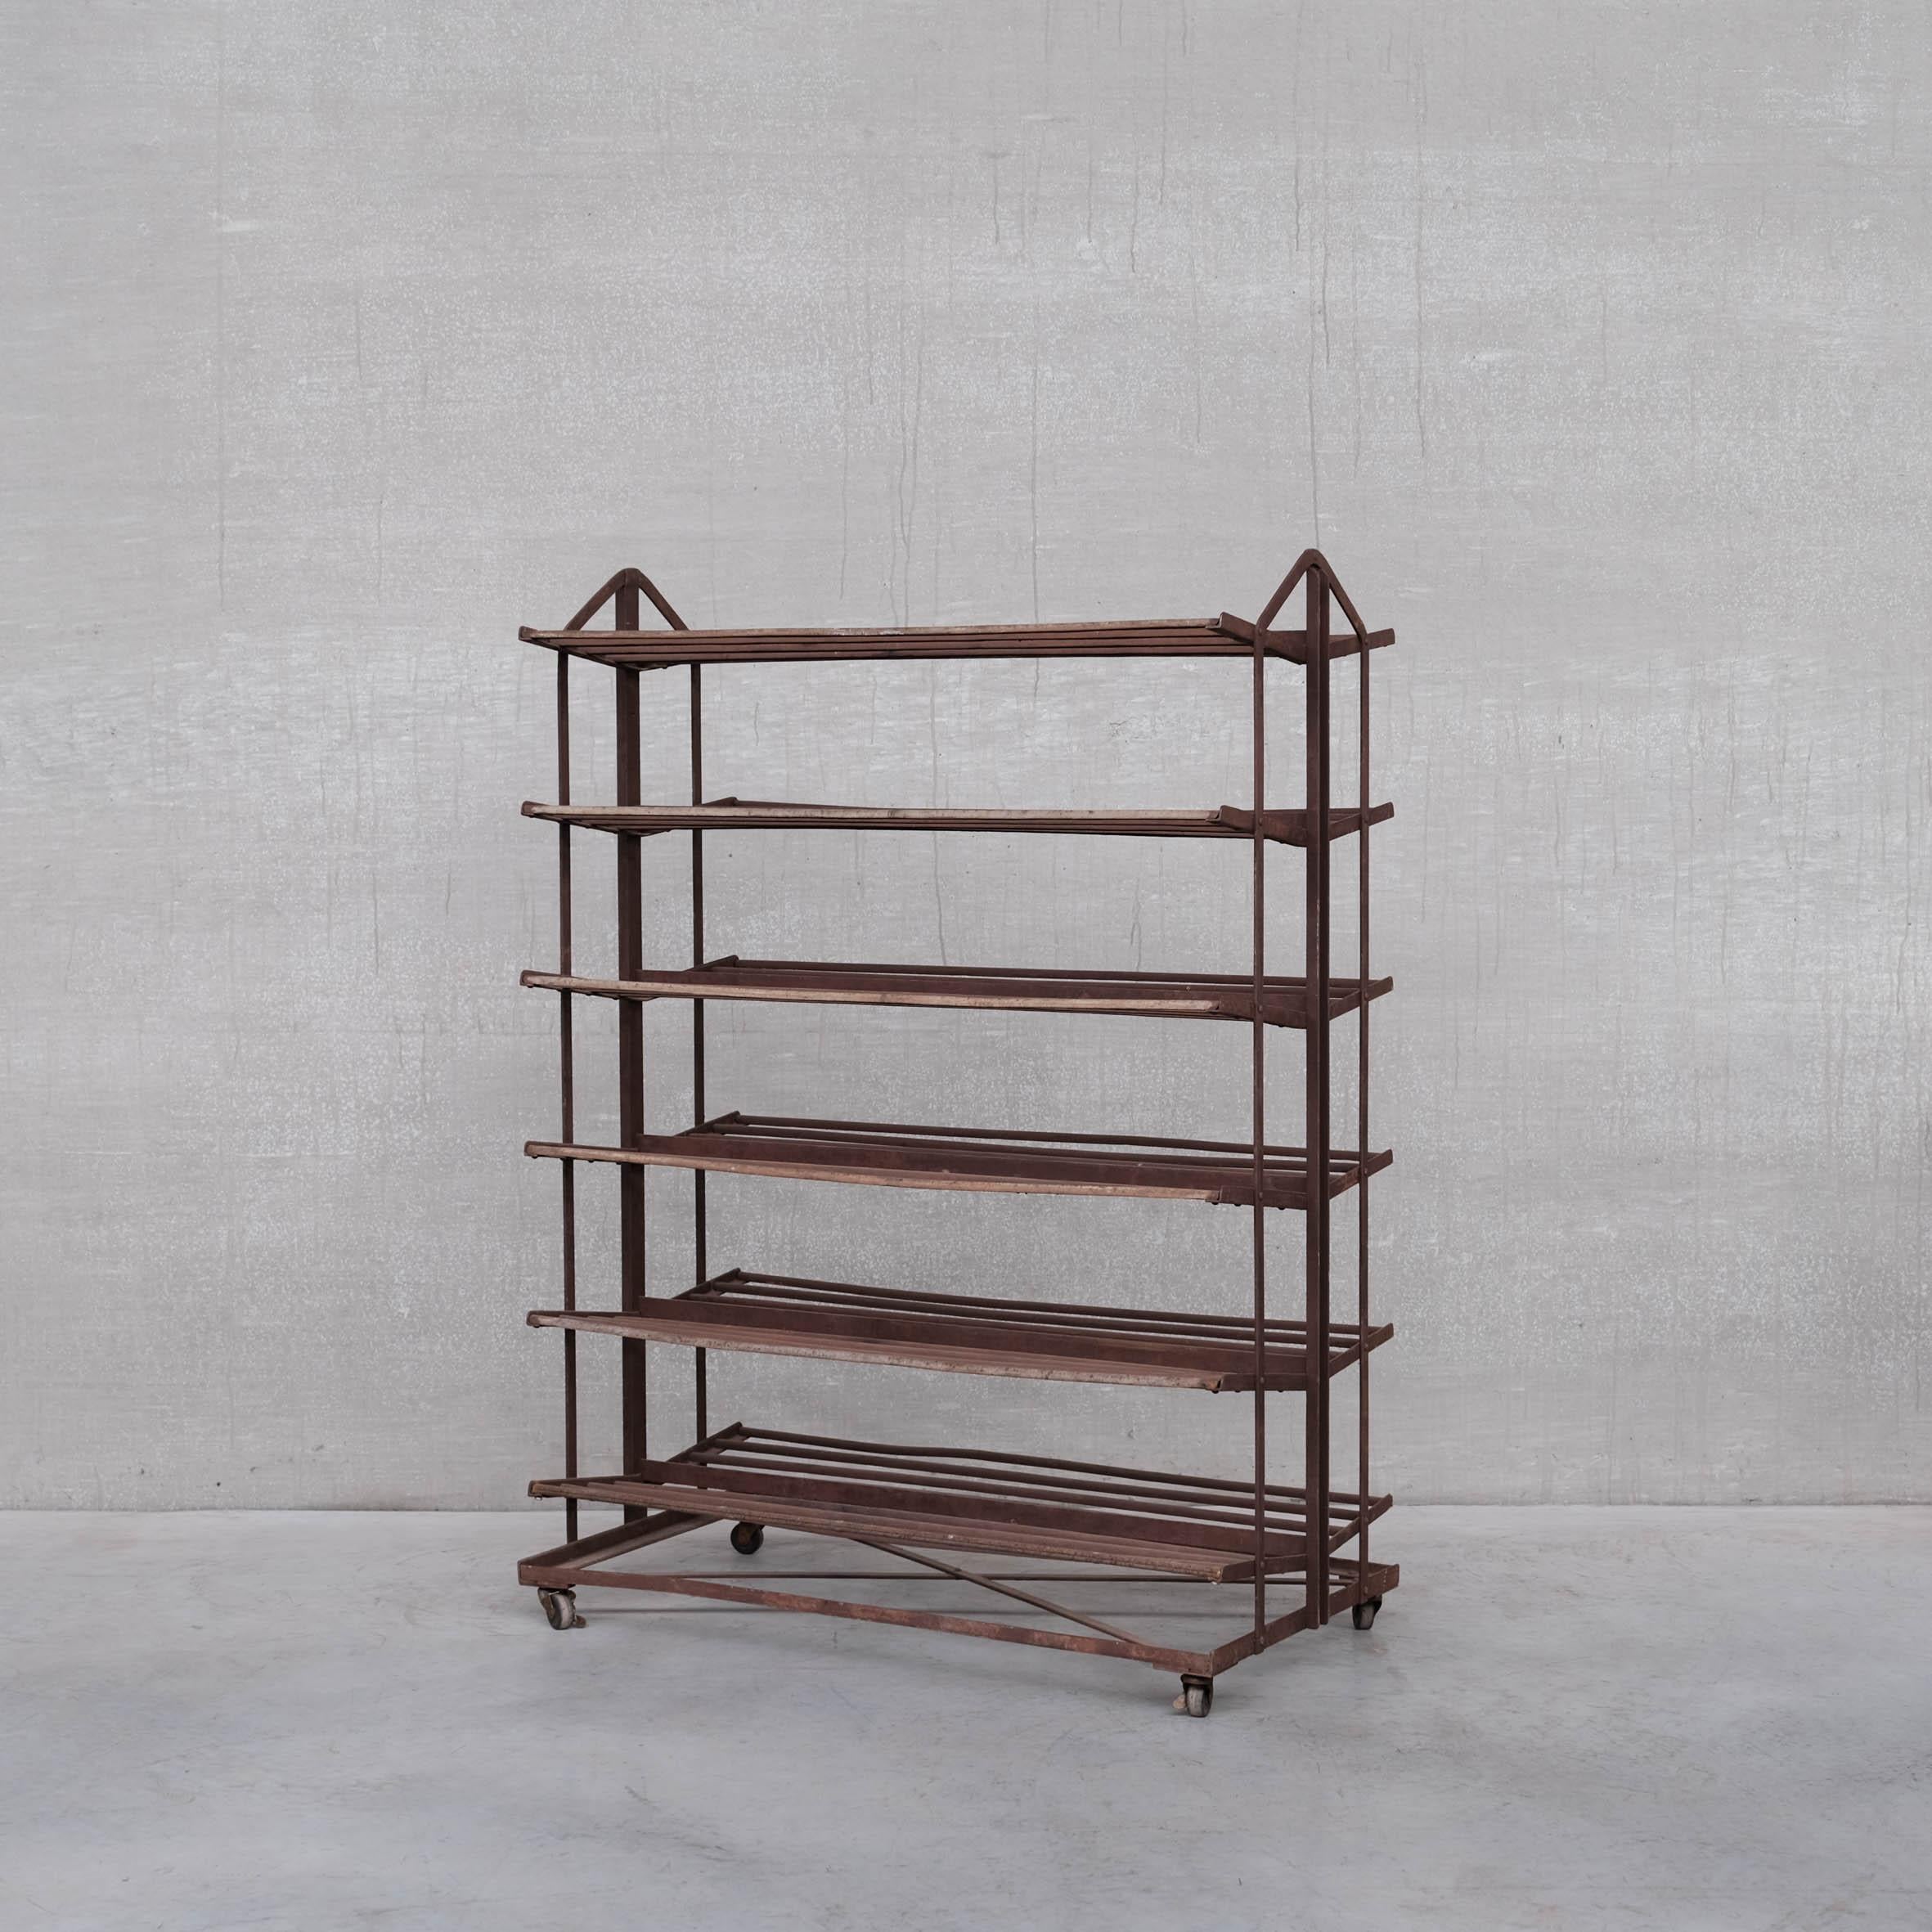 A French early display rack.

France, circa 1930s.

By repute for shoes.

Raised on castors.

Ideal display or shelving display.

Wear and patina commensurate with age.

Location: Belgium Gallery.

Dimensions: 150 H x 110 W x 55 D in